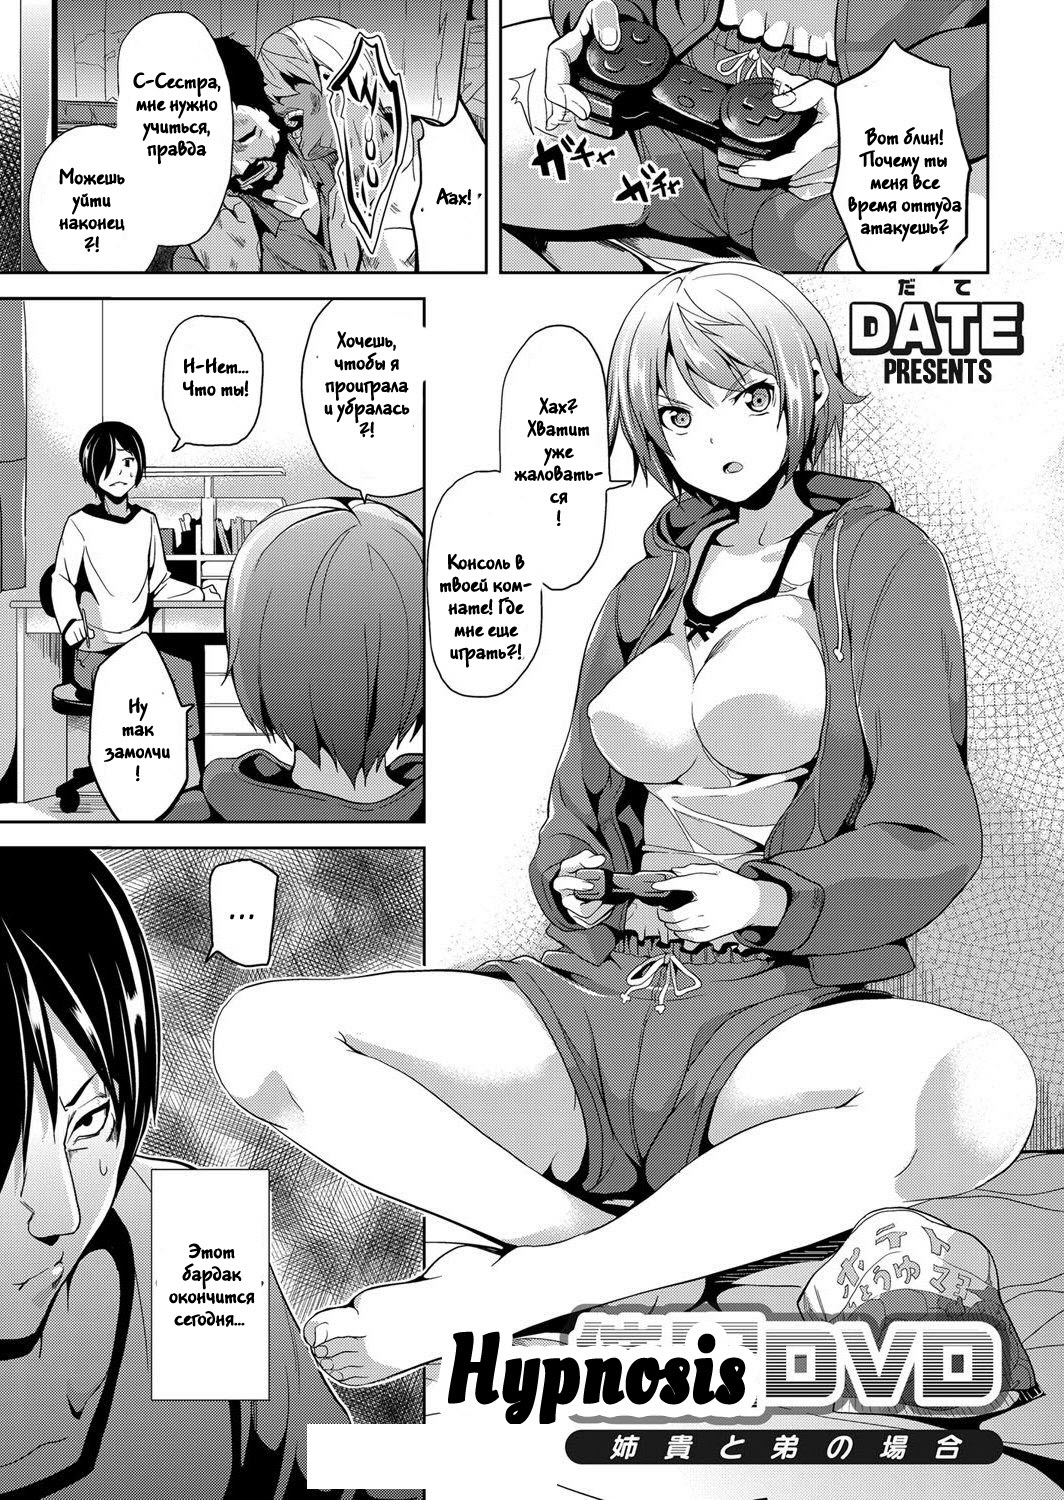 [DATE] Hypnosis DVD - The Case of the Elder Sister and Younger Brother [Russian] Hentai Comic